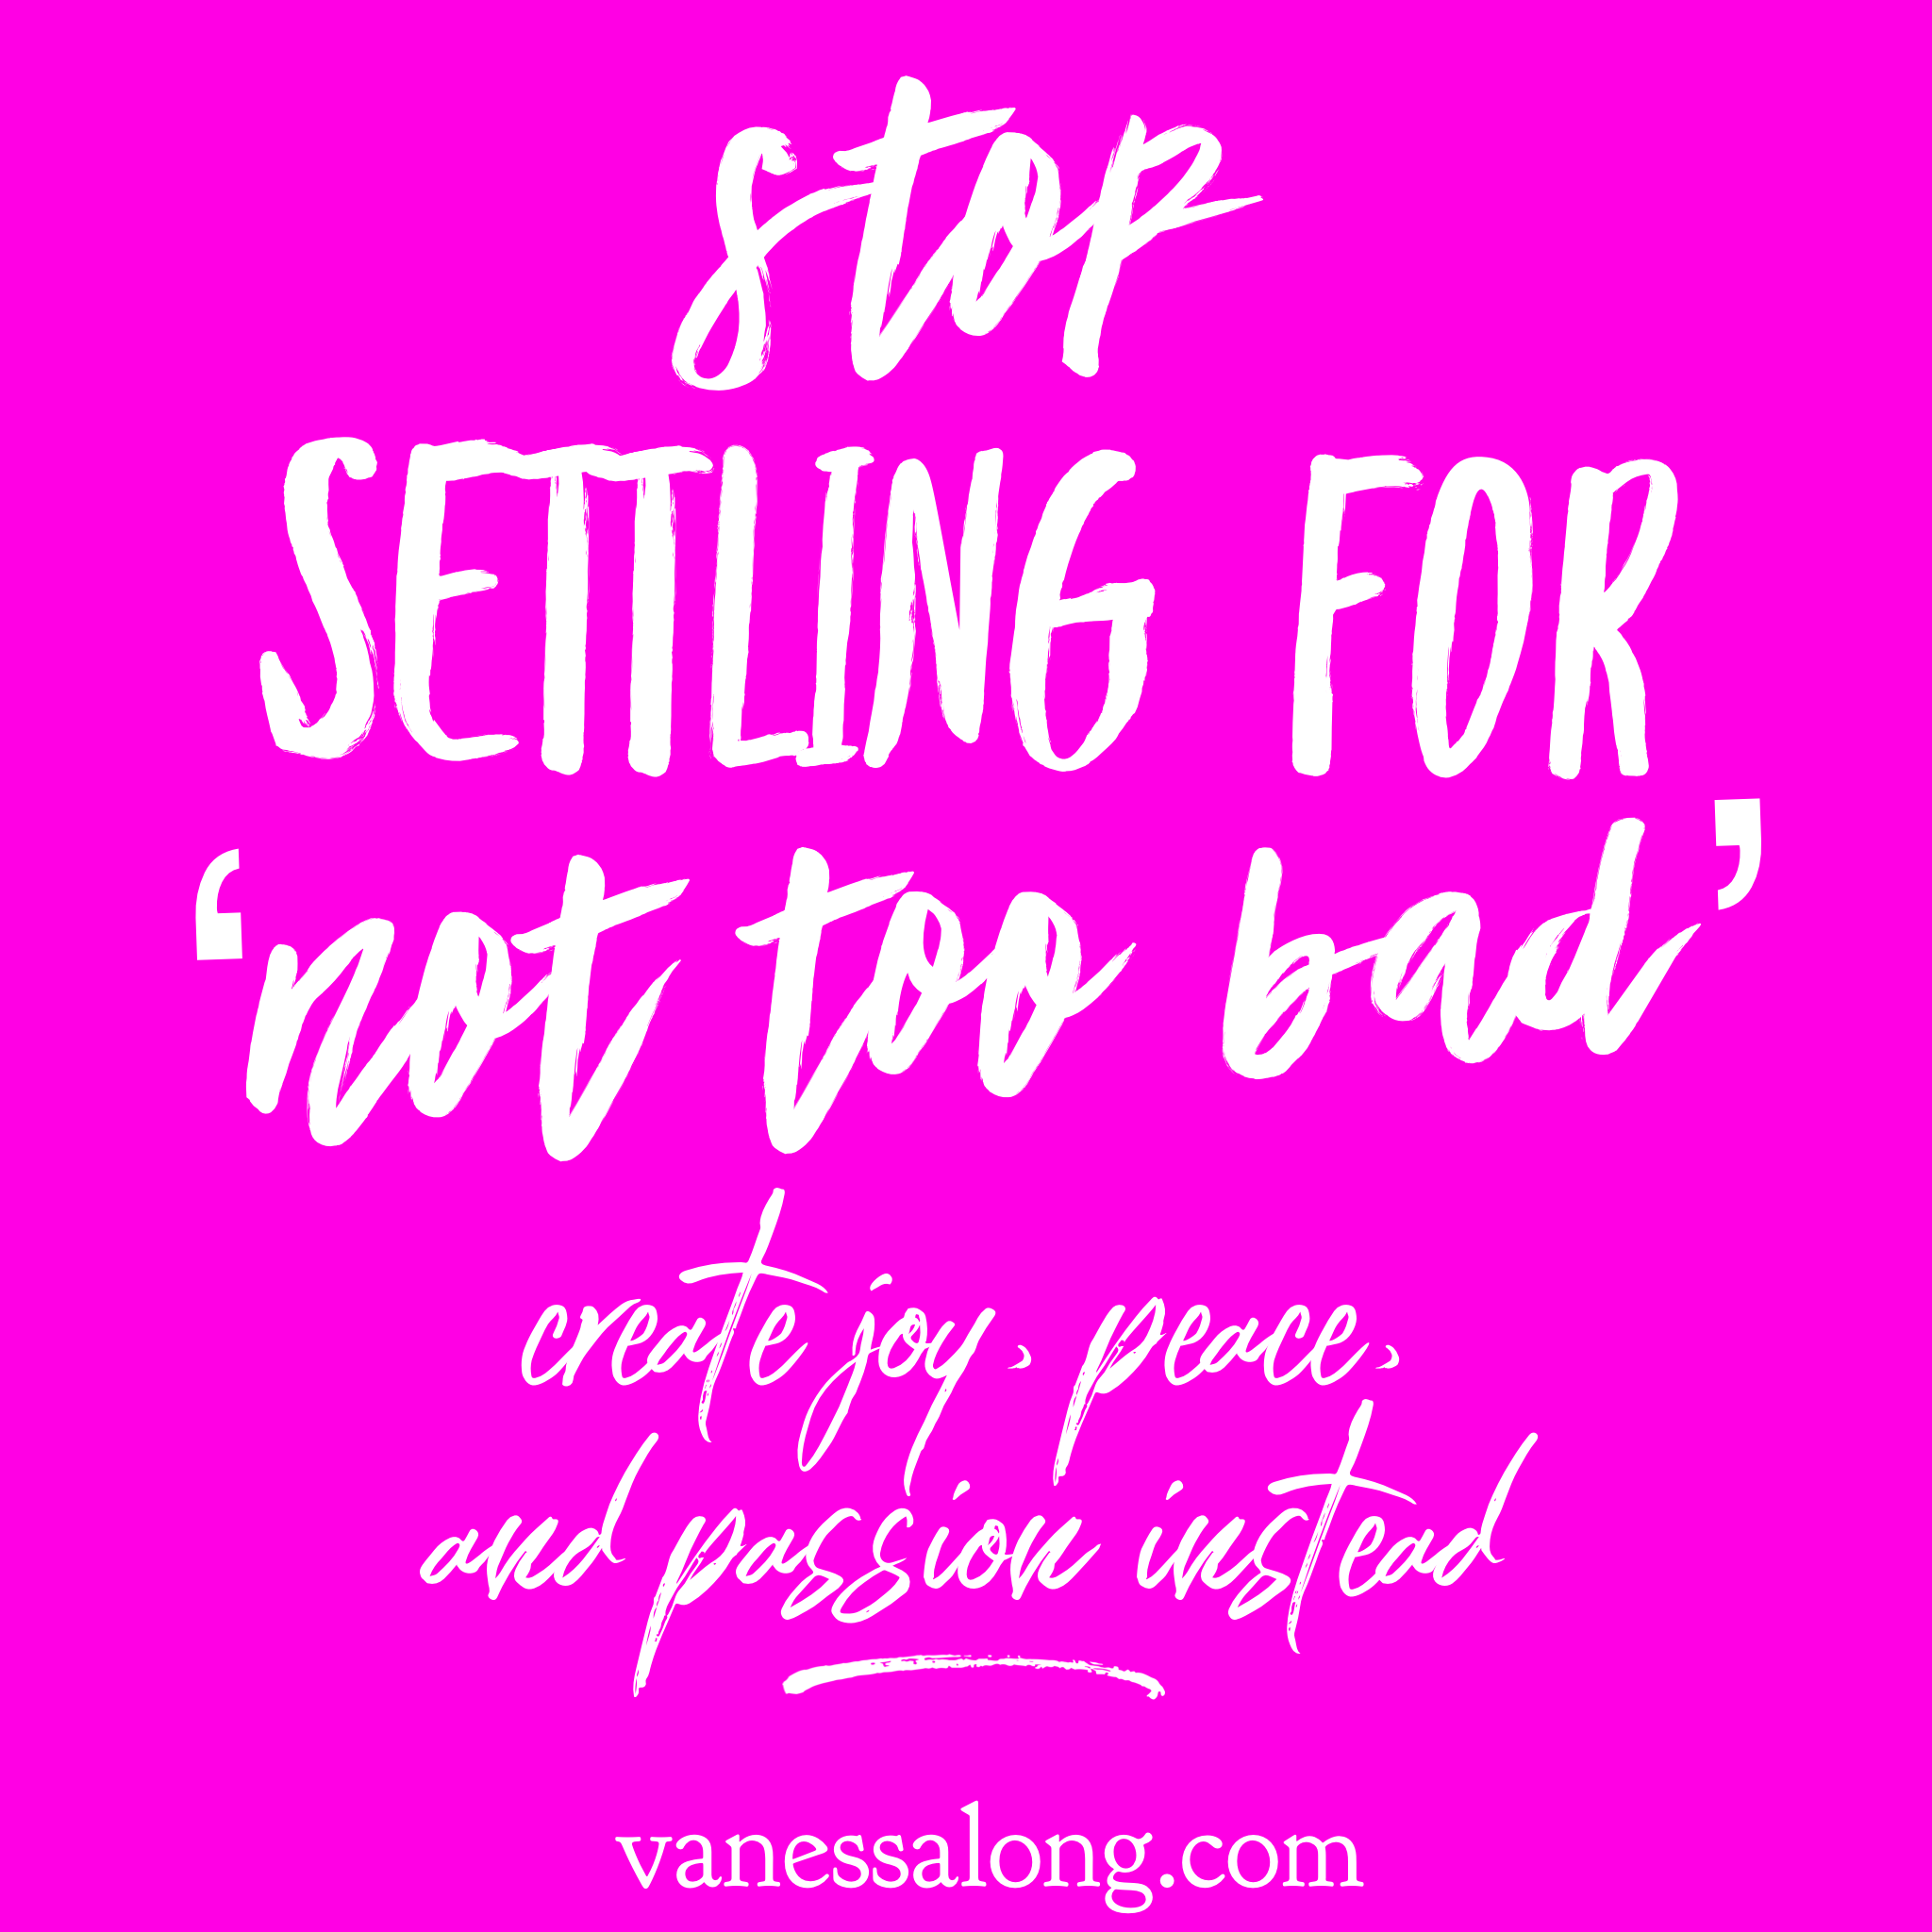 stop settling for 'not too bad', create joy, peace, and passion instead